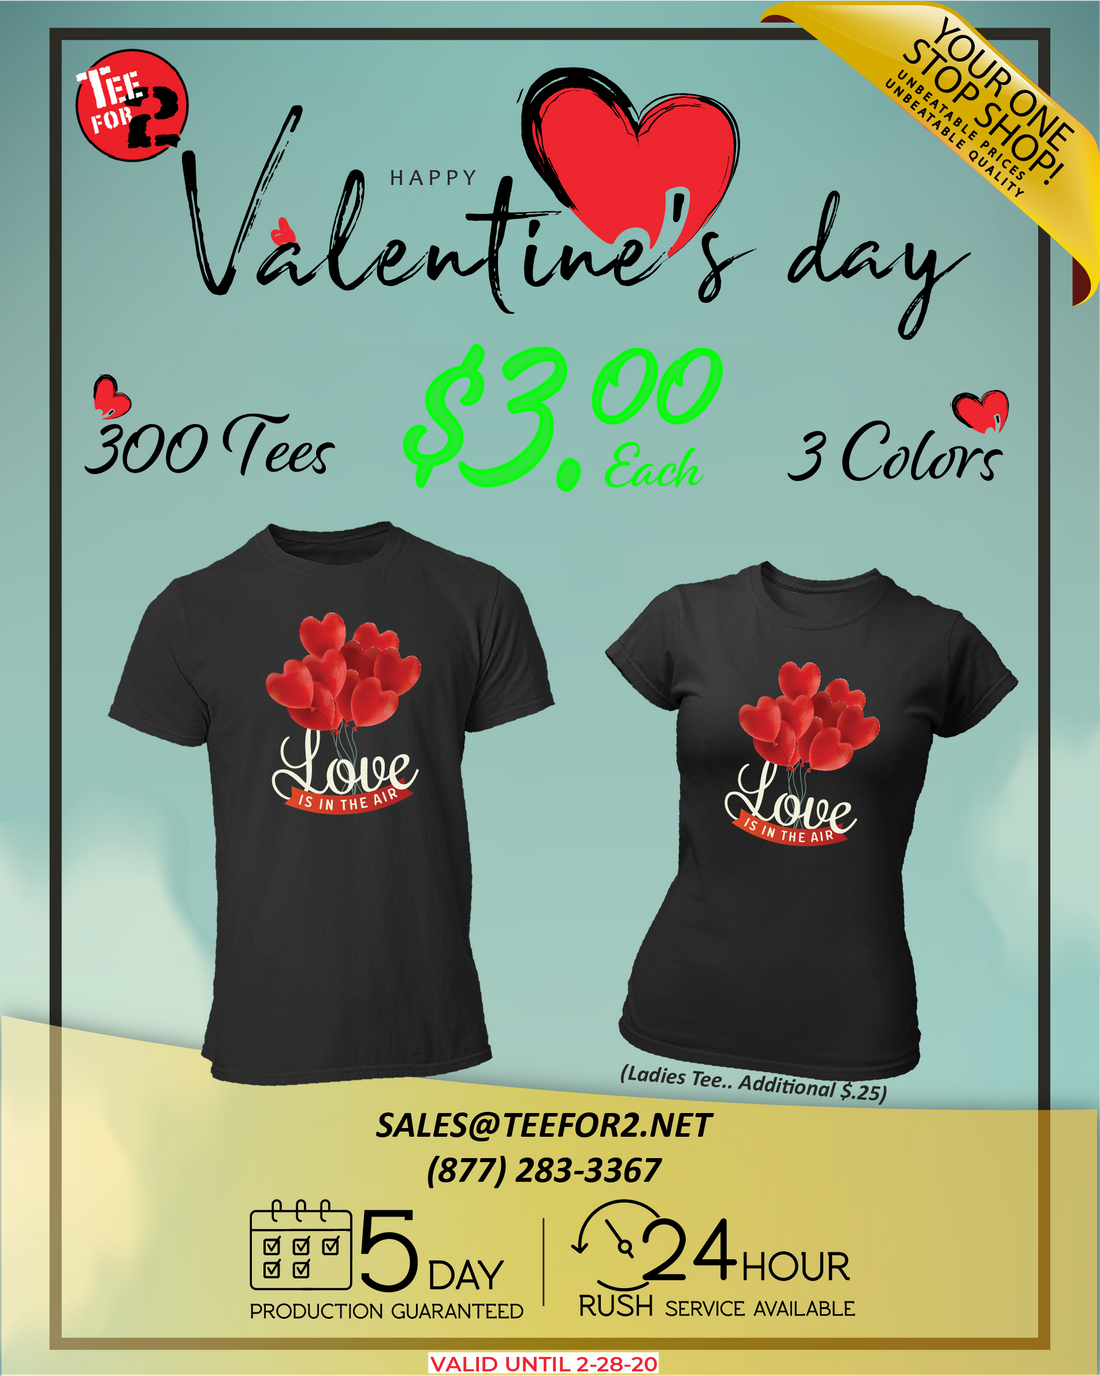 Valentine's Day Special - EXPIRED